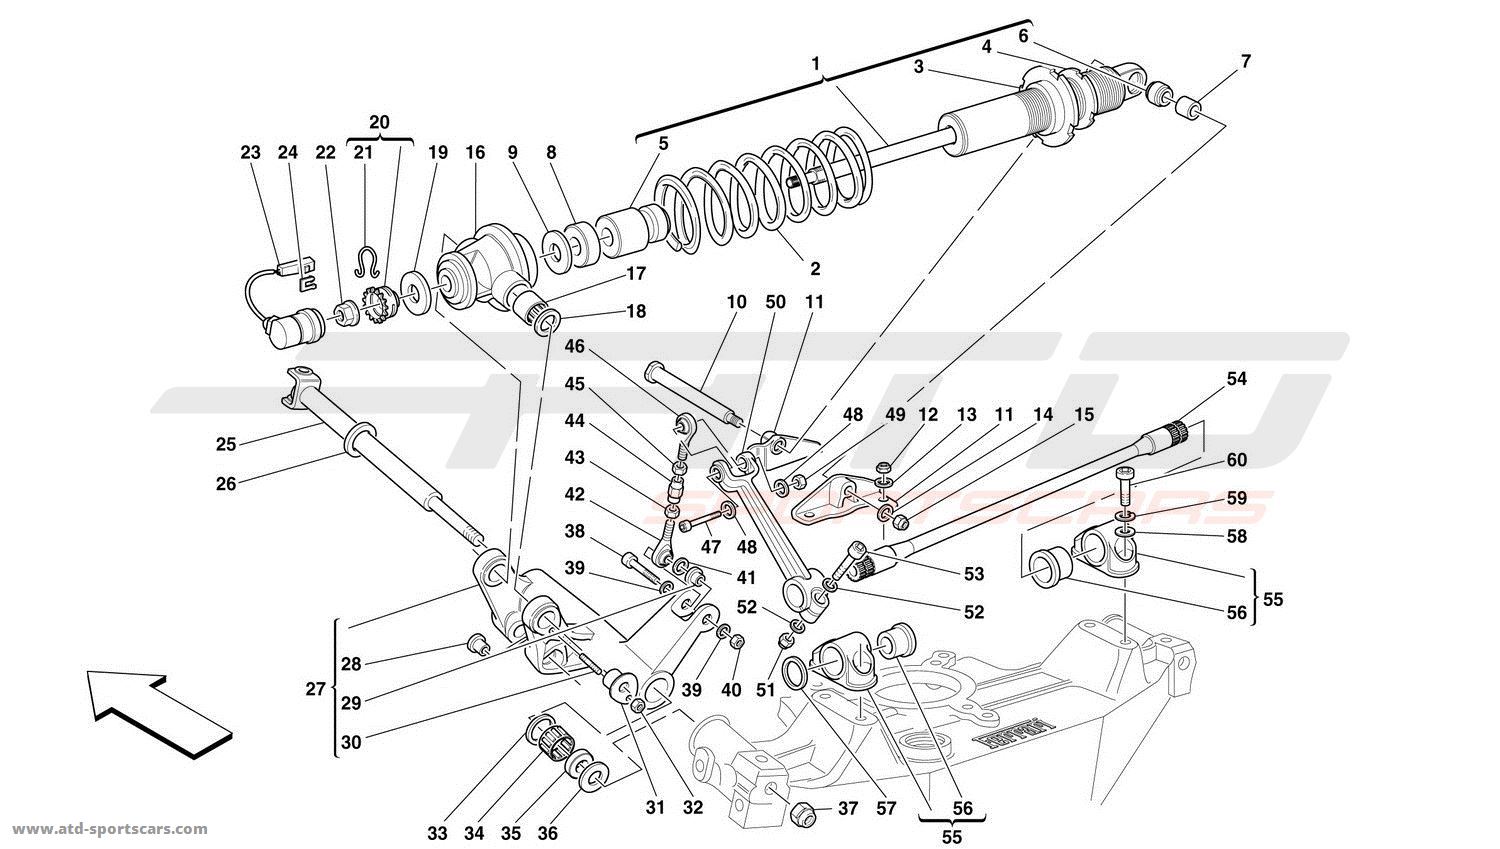 REAR SUSPENSION - SHOCK ABSORBER AND STABILIZER BAR